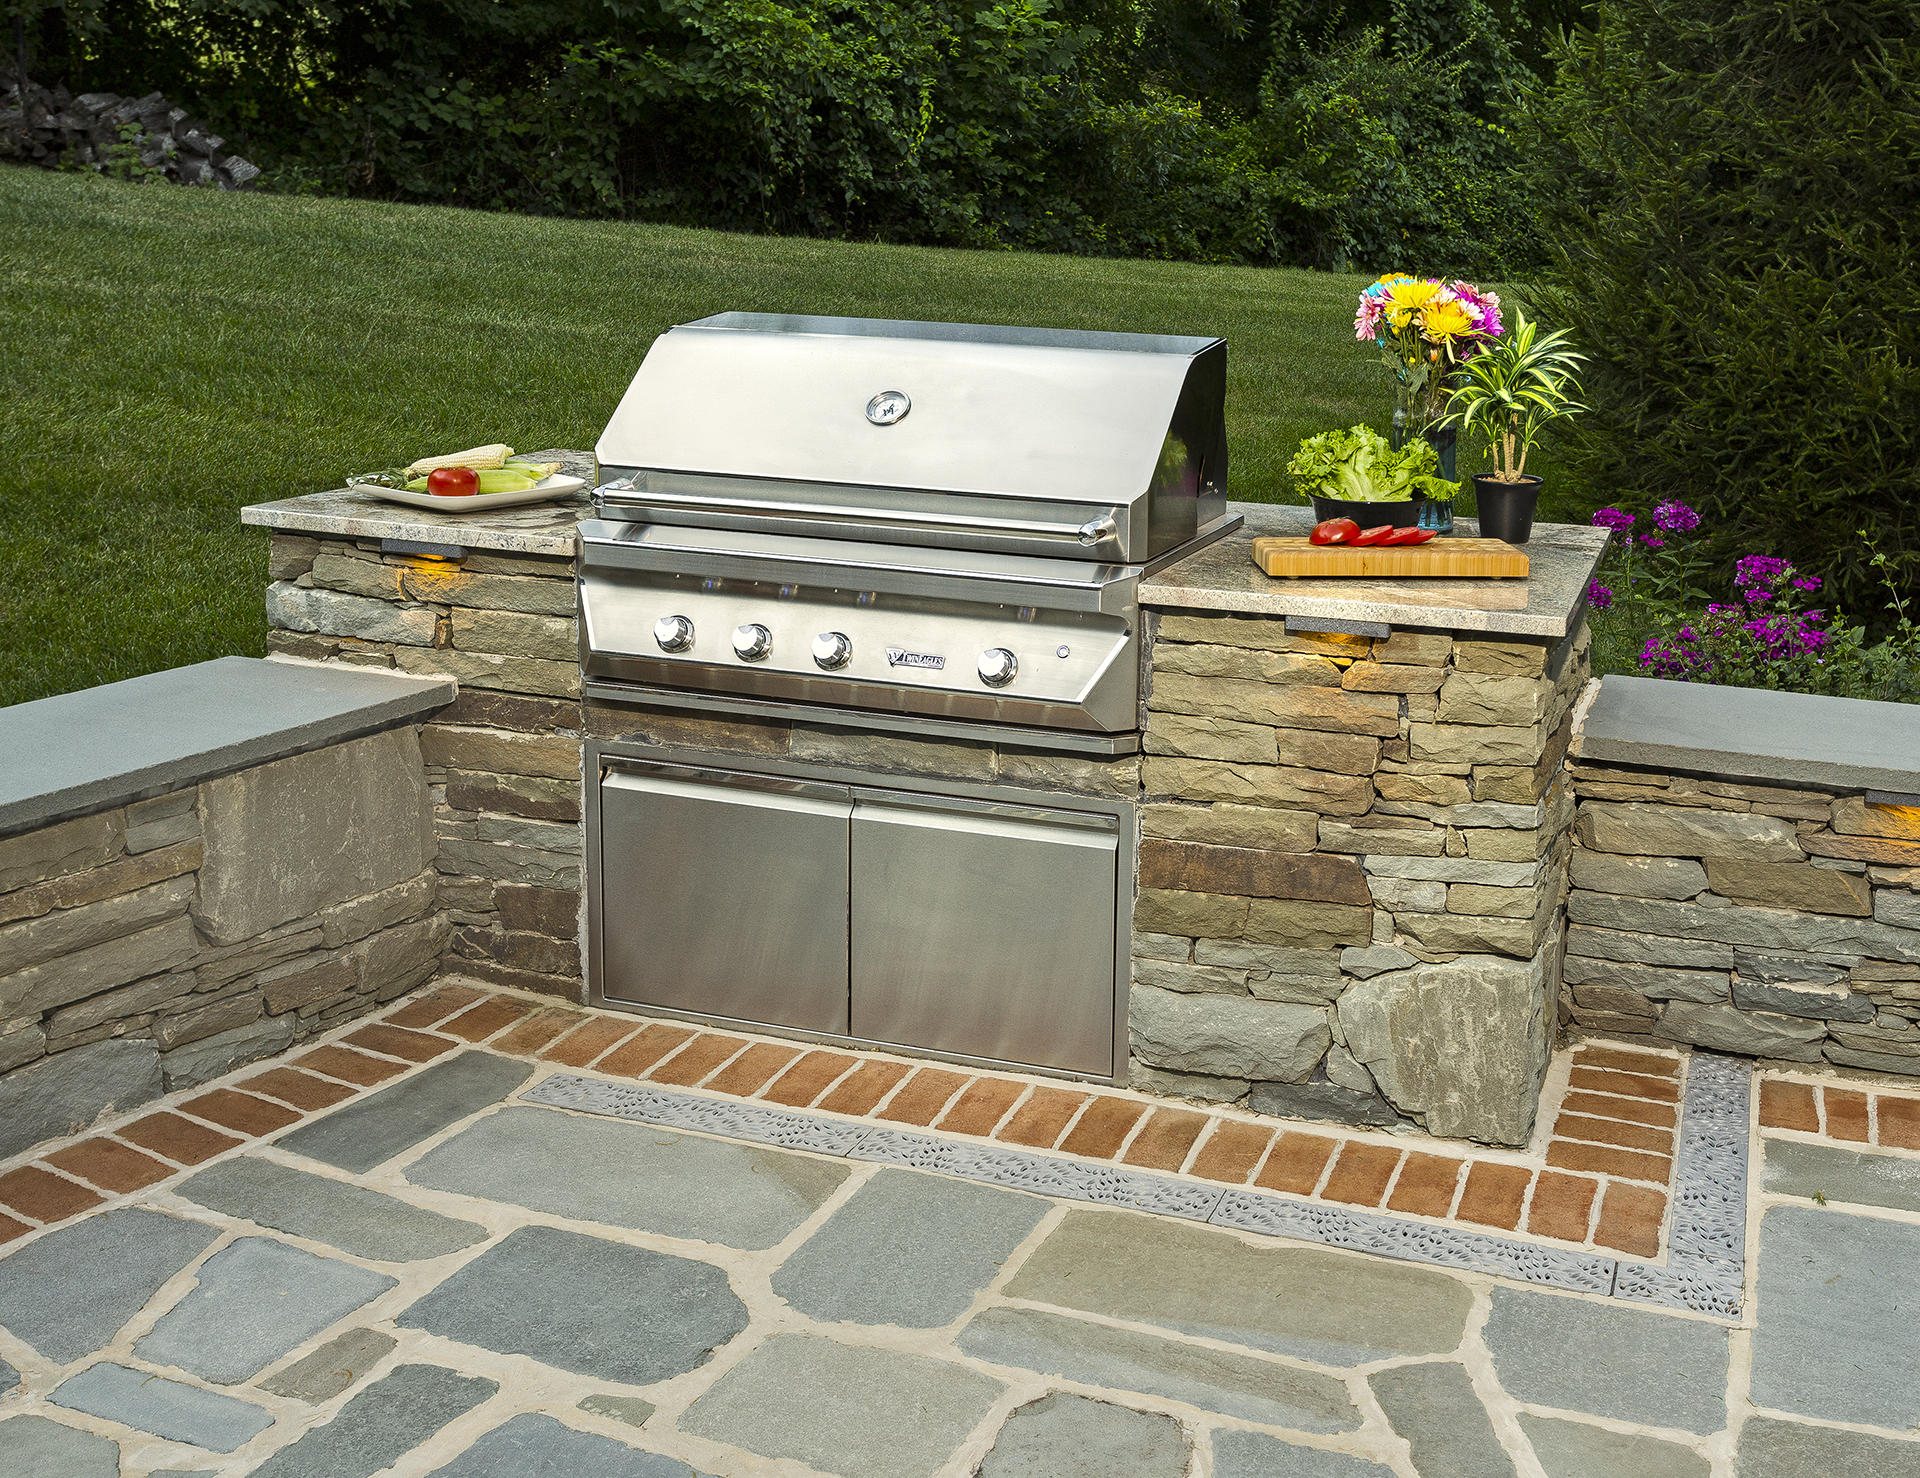 Cowan - Kennett Square, PA 19348-Outdoor Kitchen by DiSabatino Landscaping & Esposito Masonry